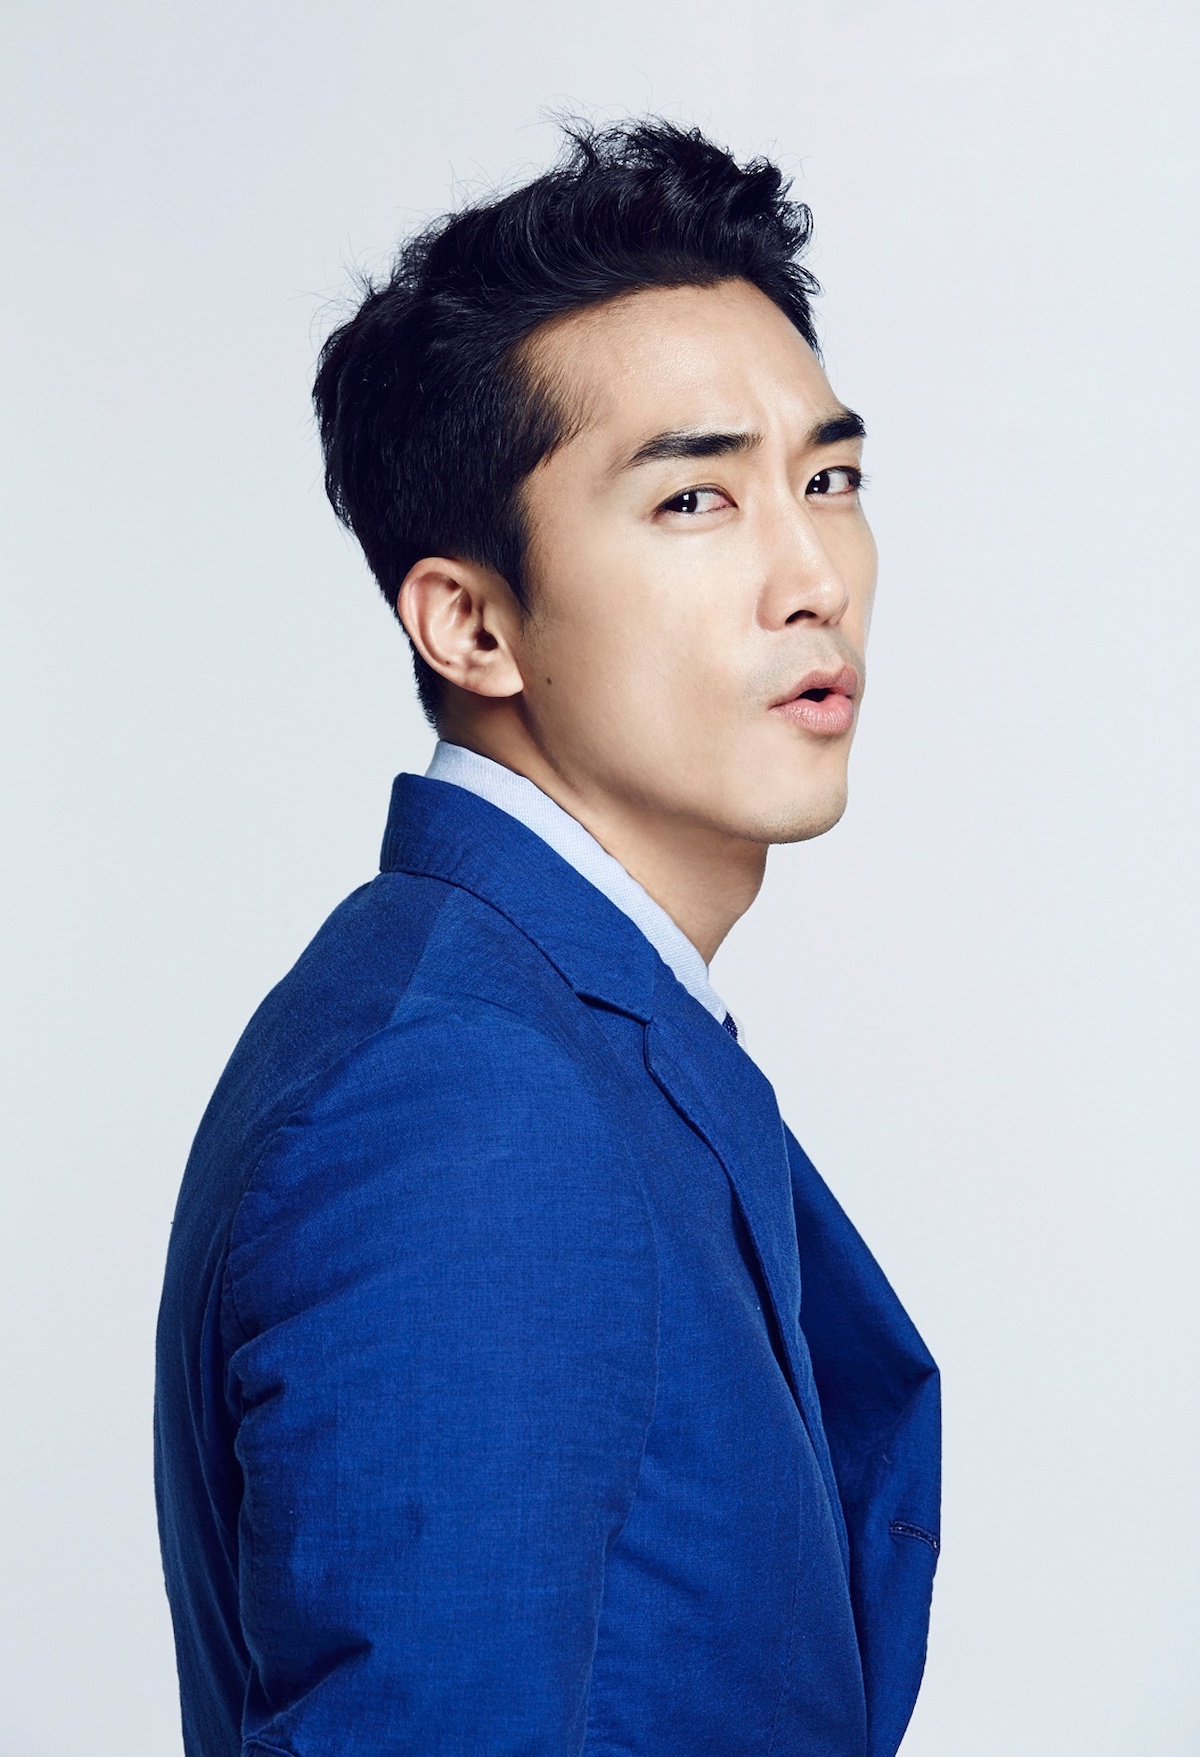 Song Seung-Heon cast in MBC drama series “Would You Like To Have Dinner